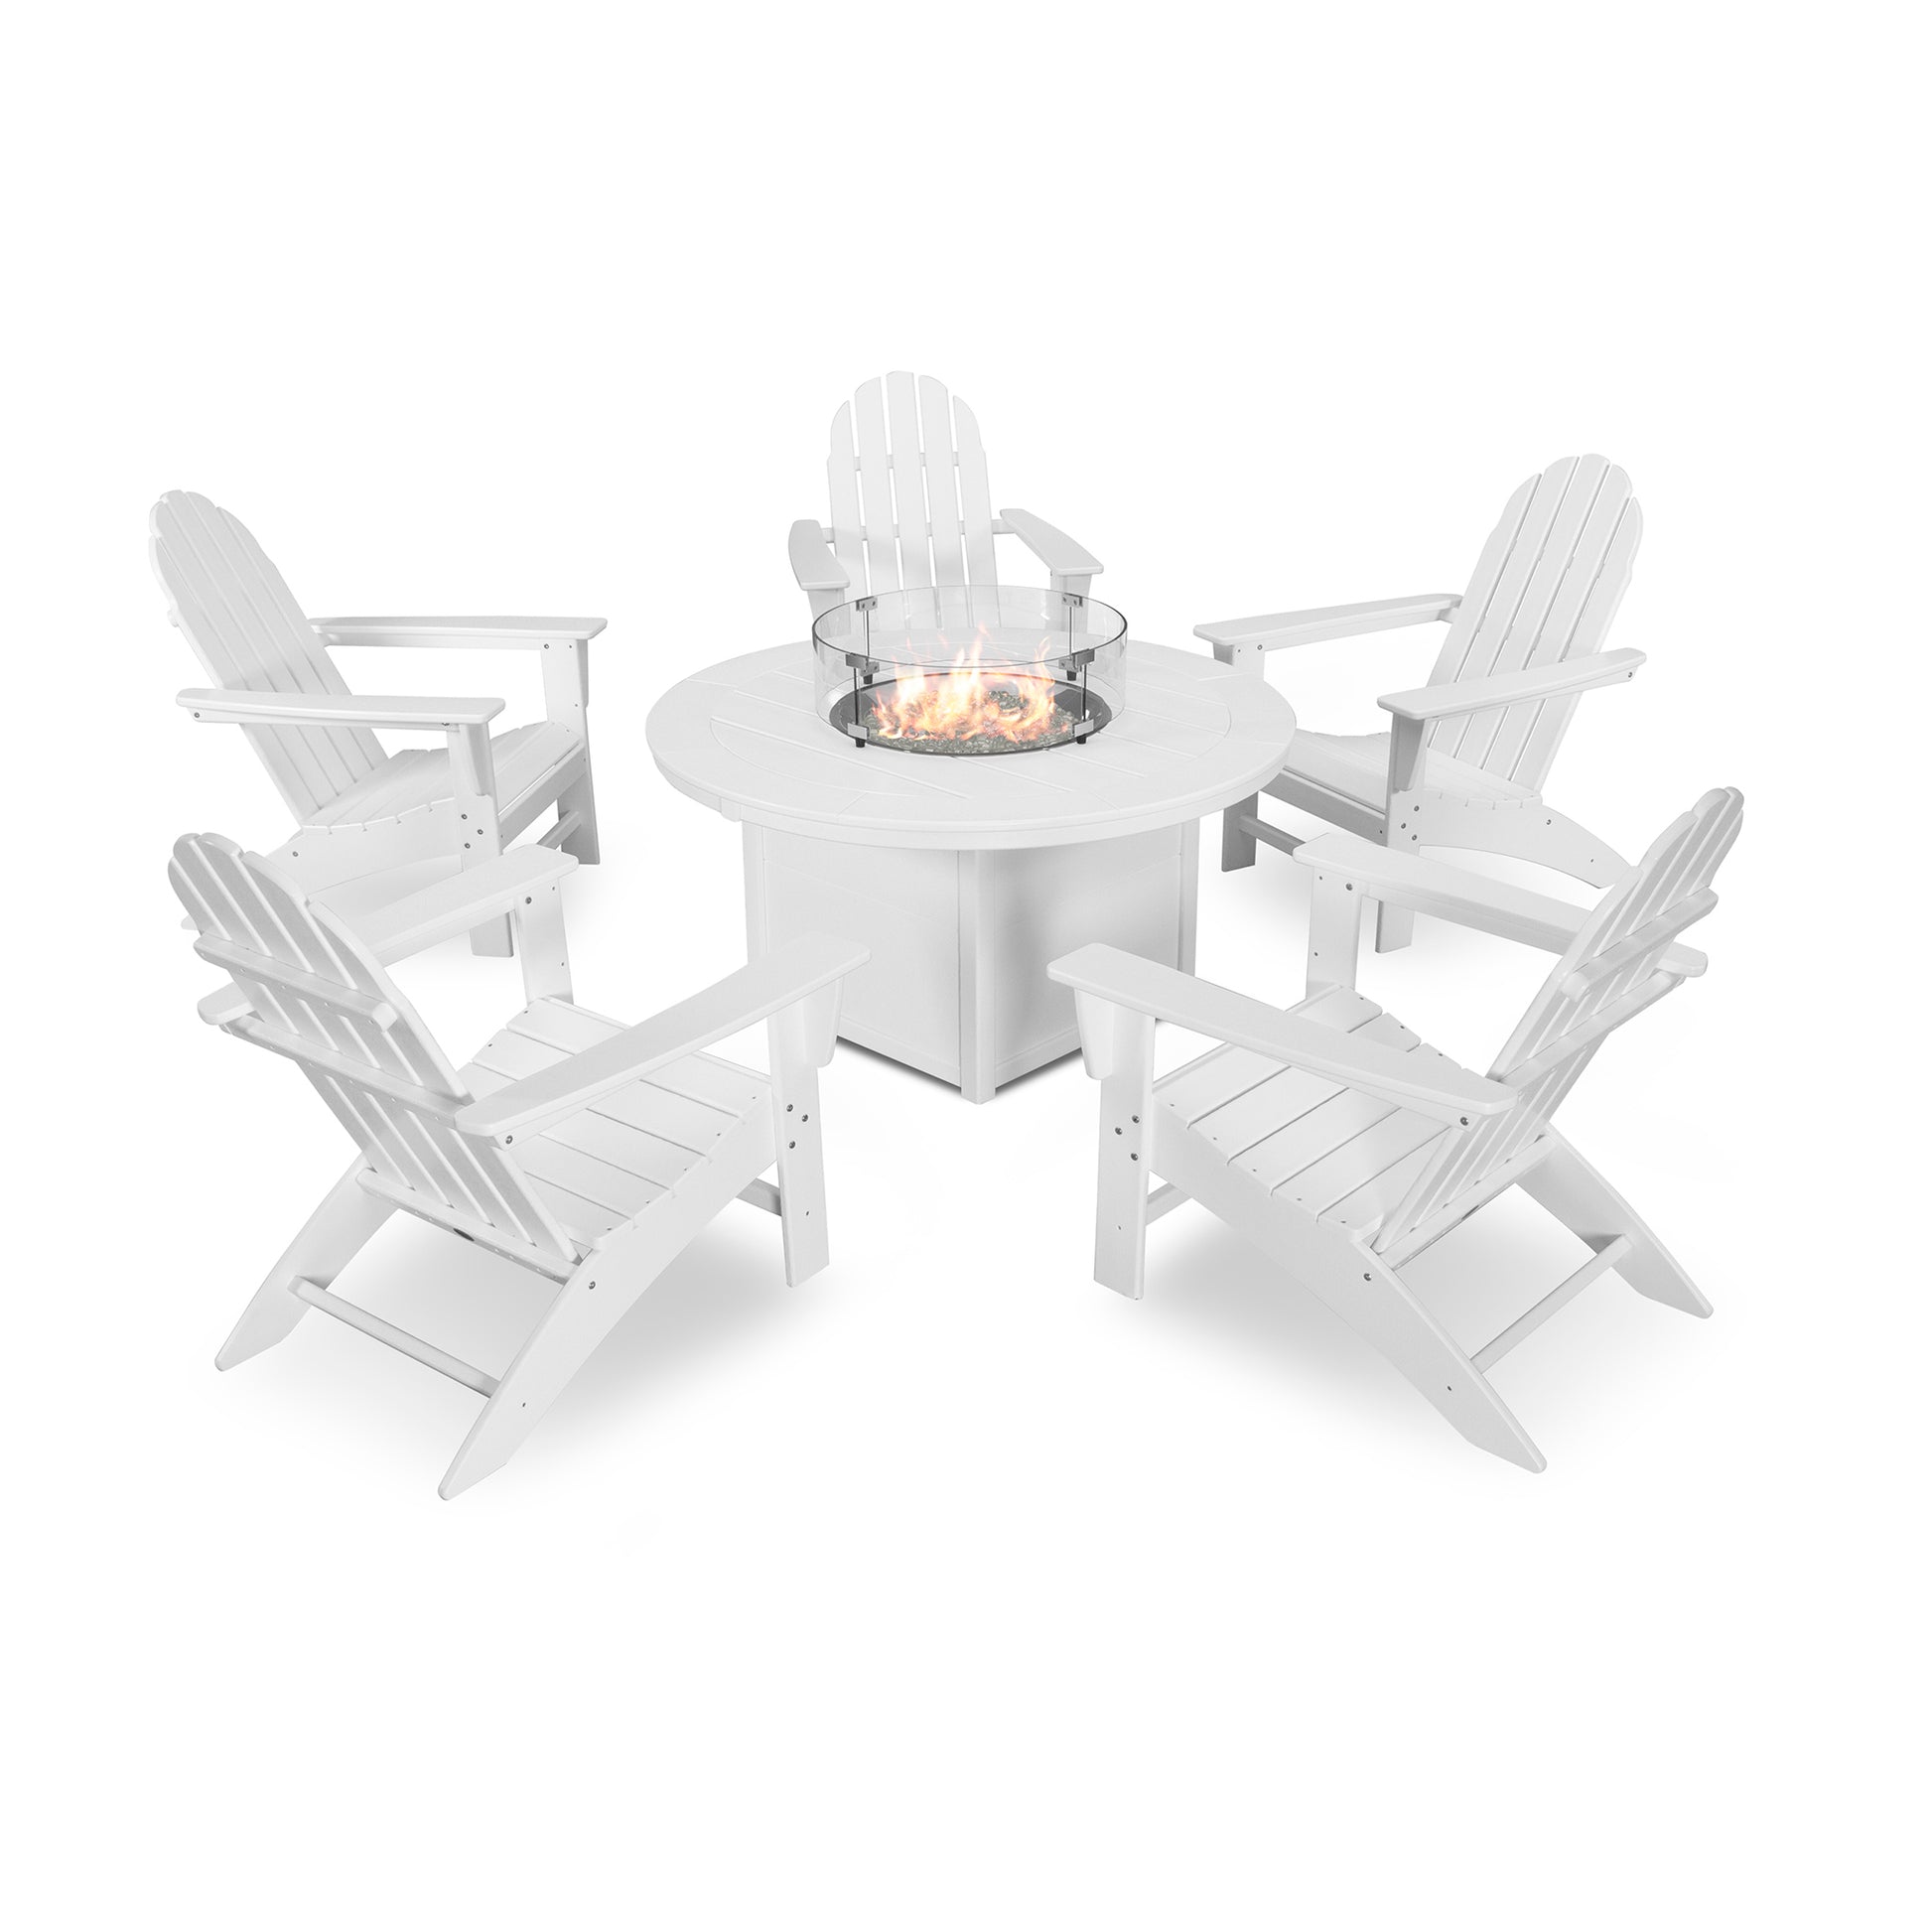 Four white POLYWOOD Vineyard Adirondack chairs arranged around a white circular fire pit table with visible flames, set against a plain white background.